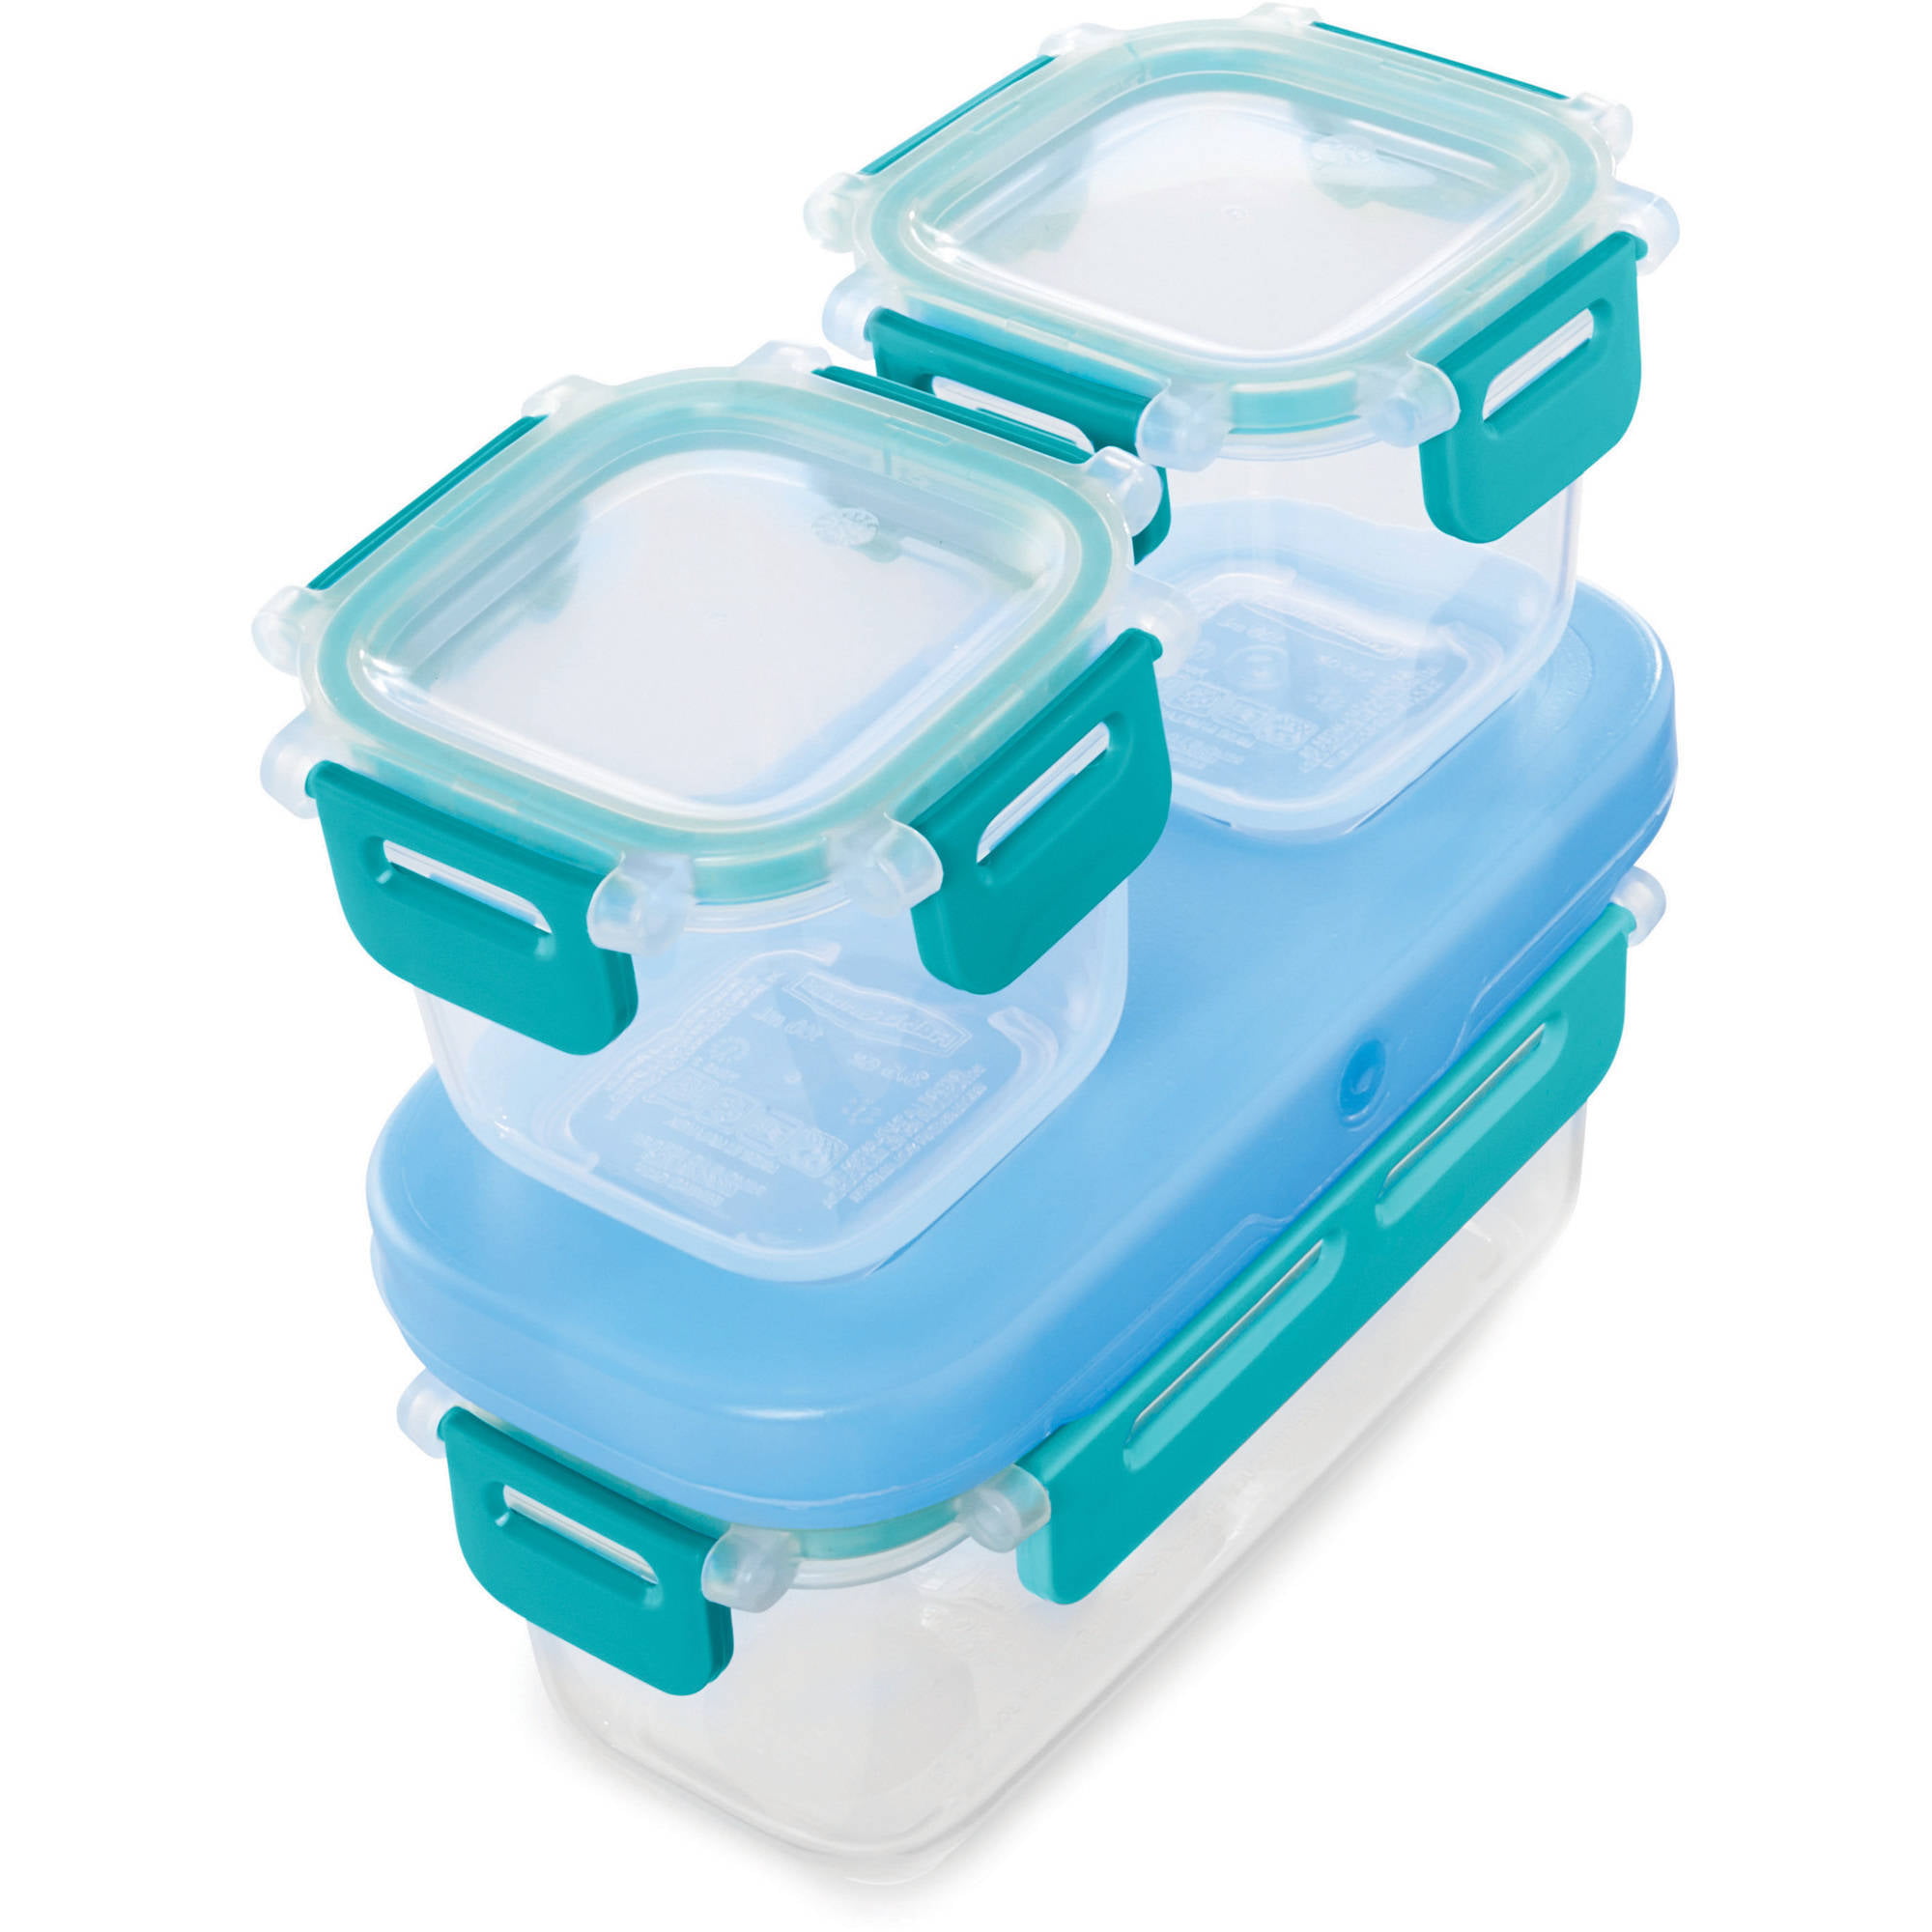 Rubbermaid LunchBlox Leak-Proof Meal Kit Container Kit with Case Blue 